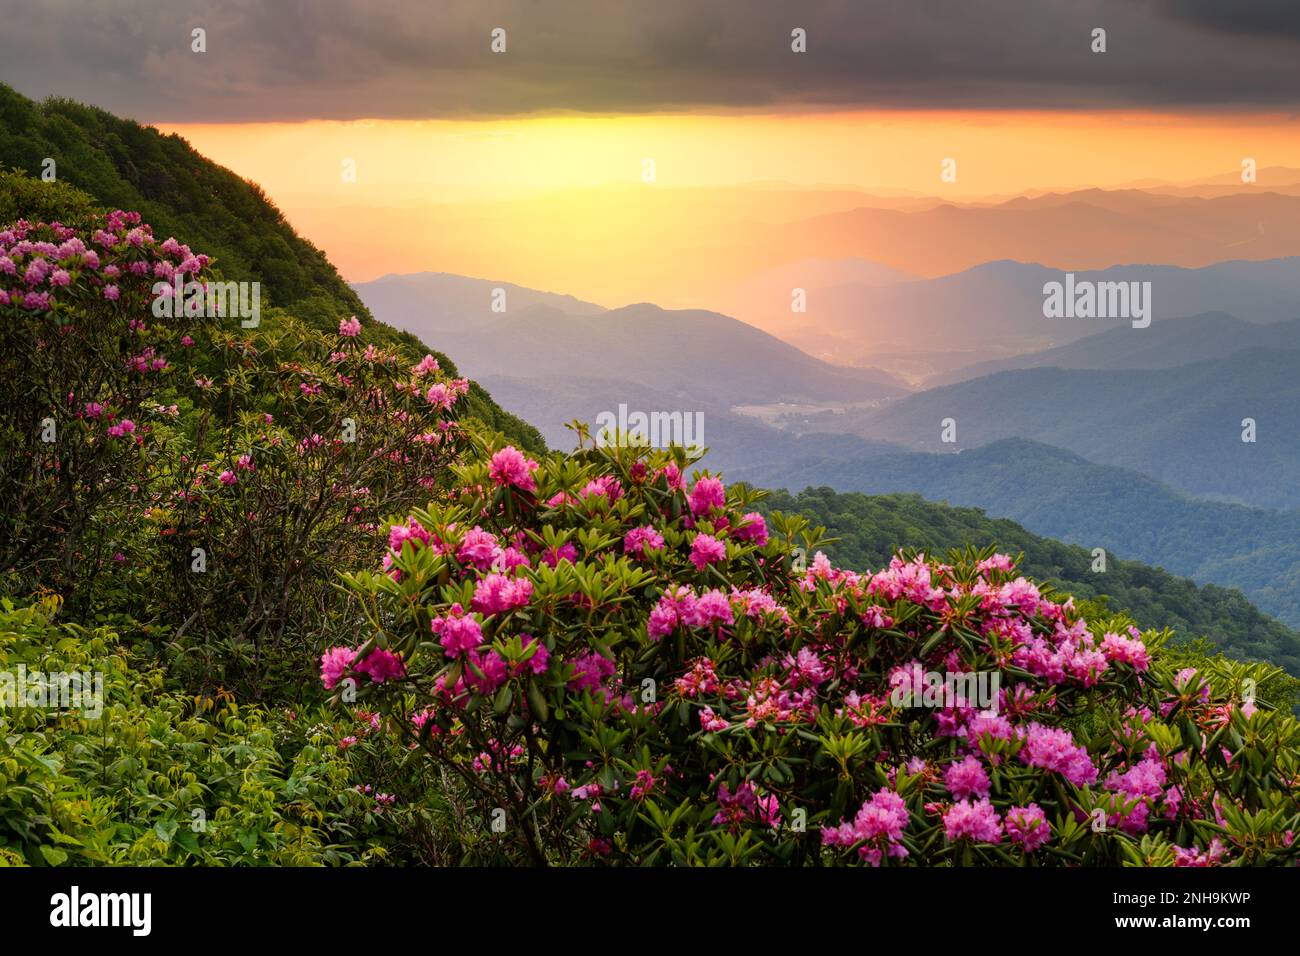 The Great Craggy Mountains along the Blue Ridge Parkway in North Carolina, USA with Catawba Rhododendron during a spring season sunset. Stock Photo